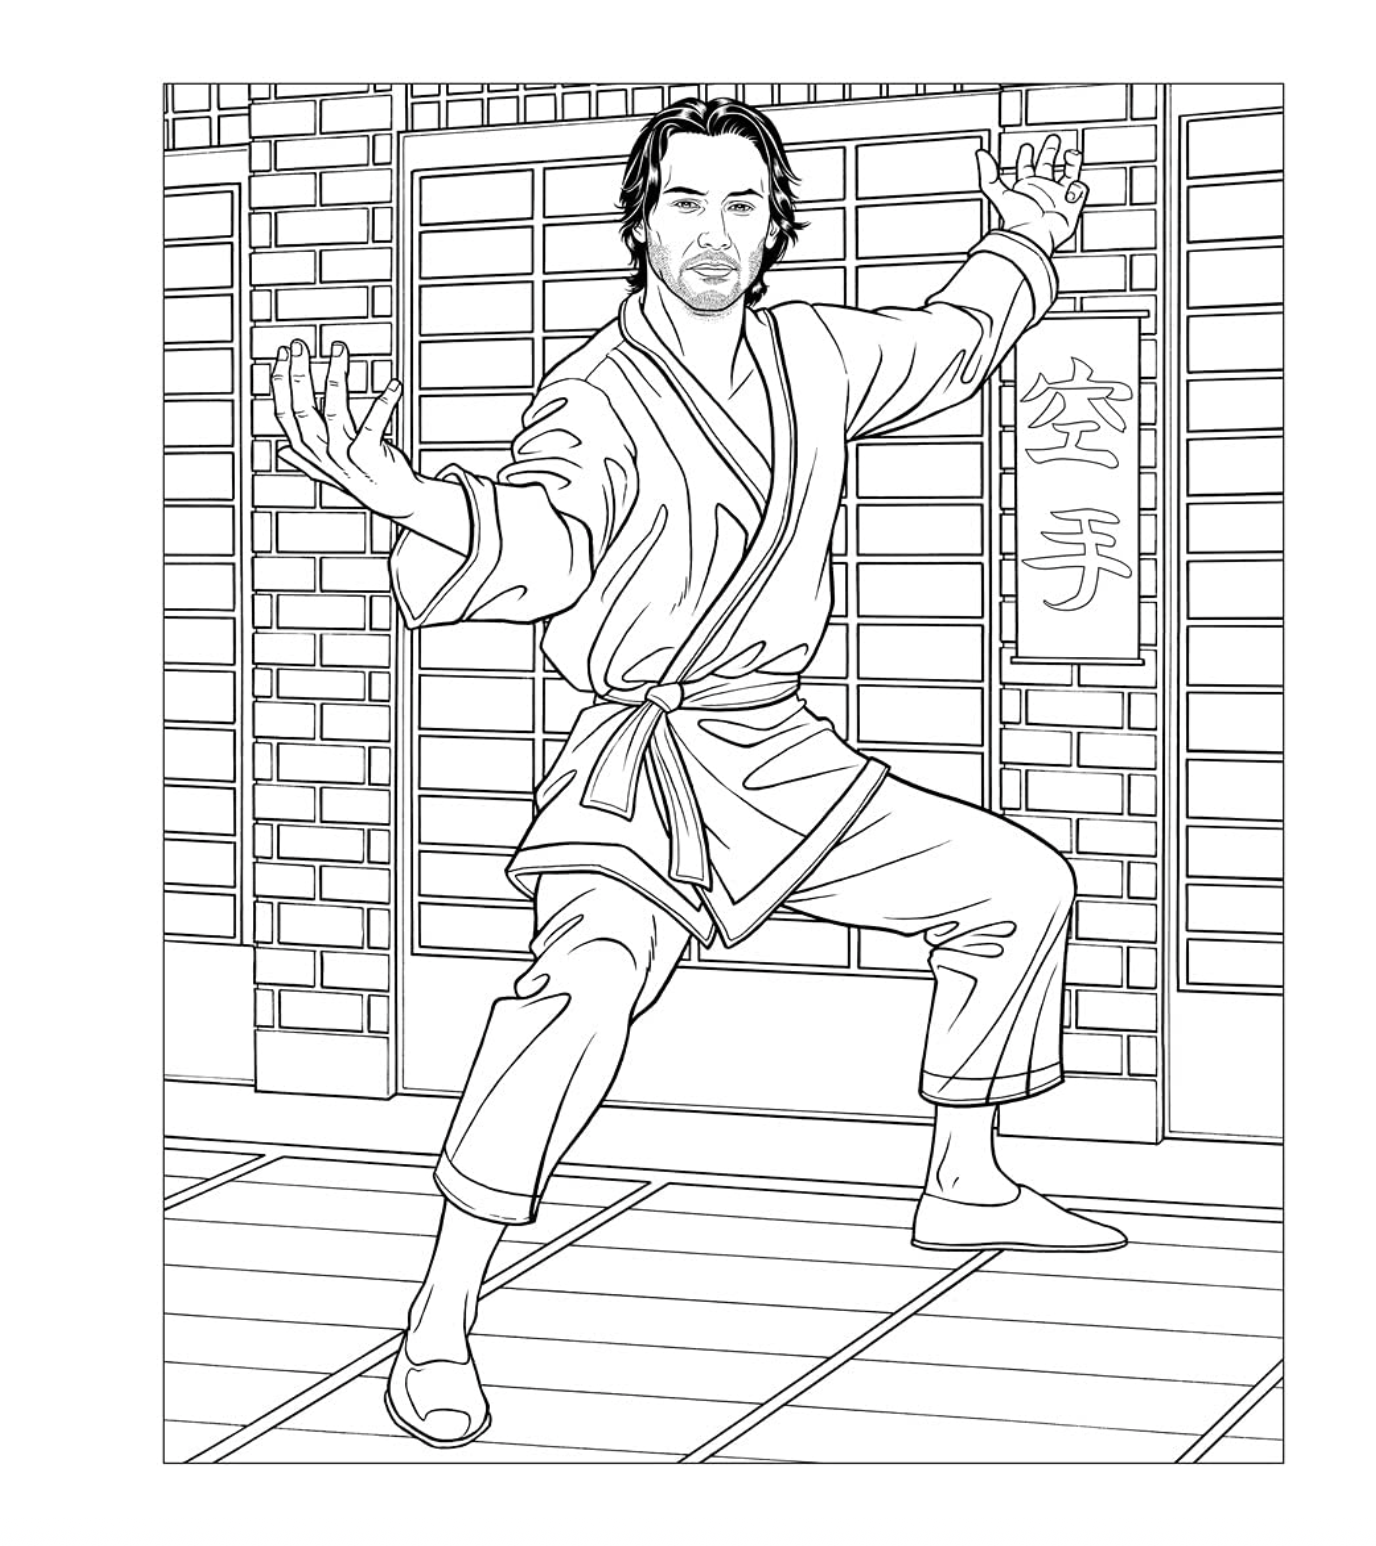 Crush and Color Keanu Reeves Coloring Book